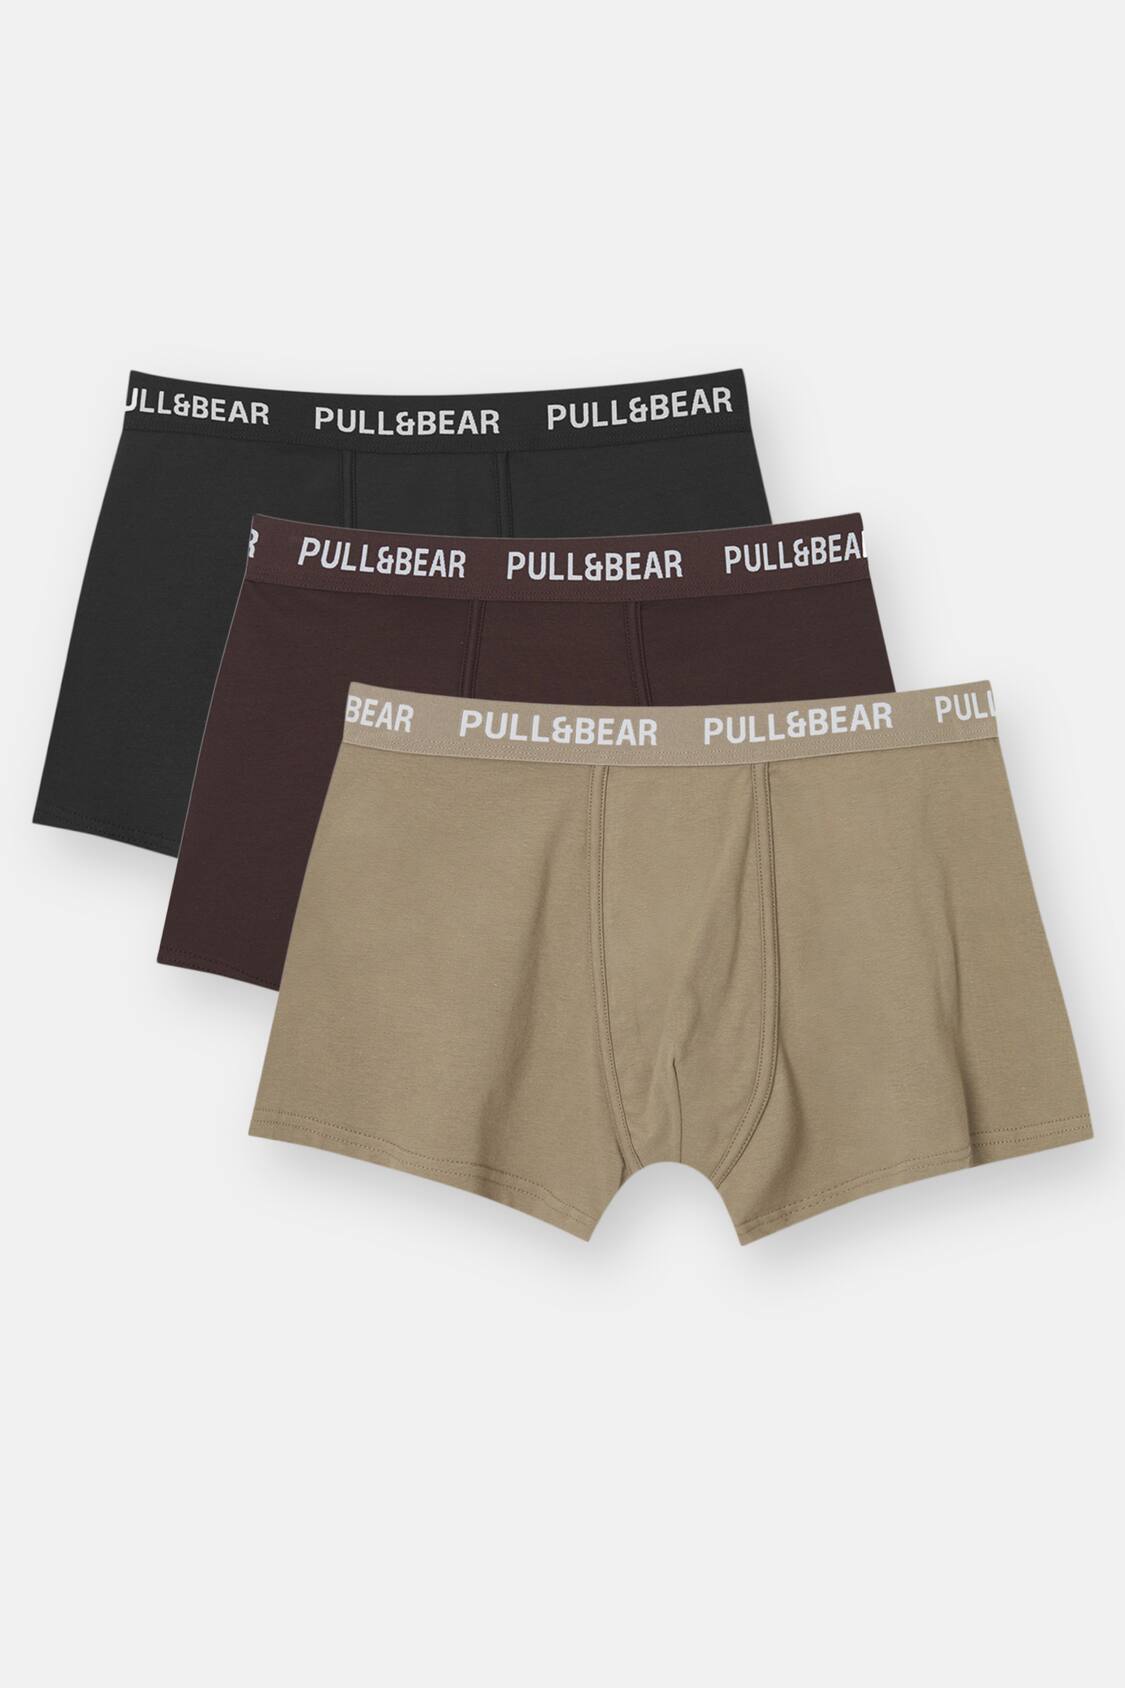 Pack of 3 boxers - PULL&BEAR